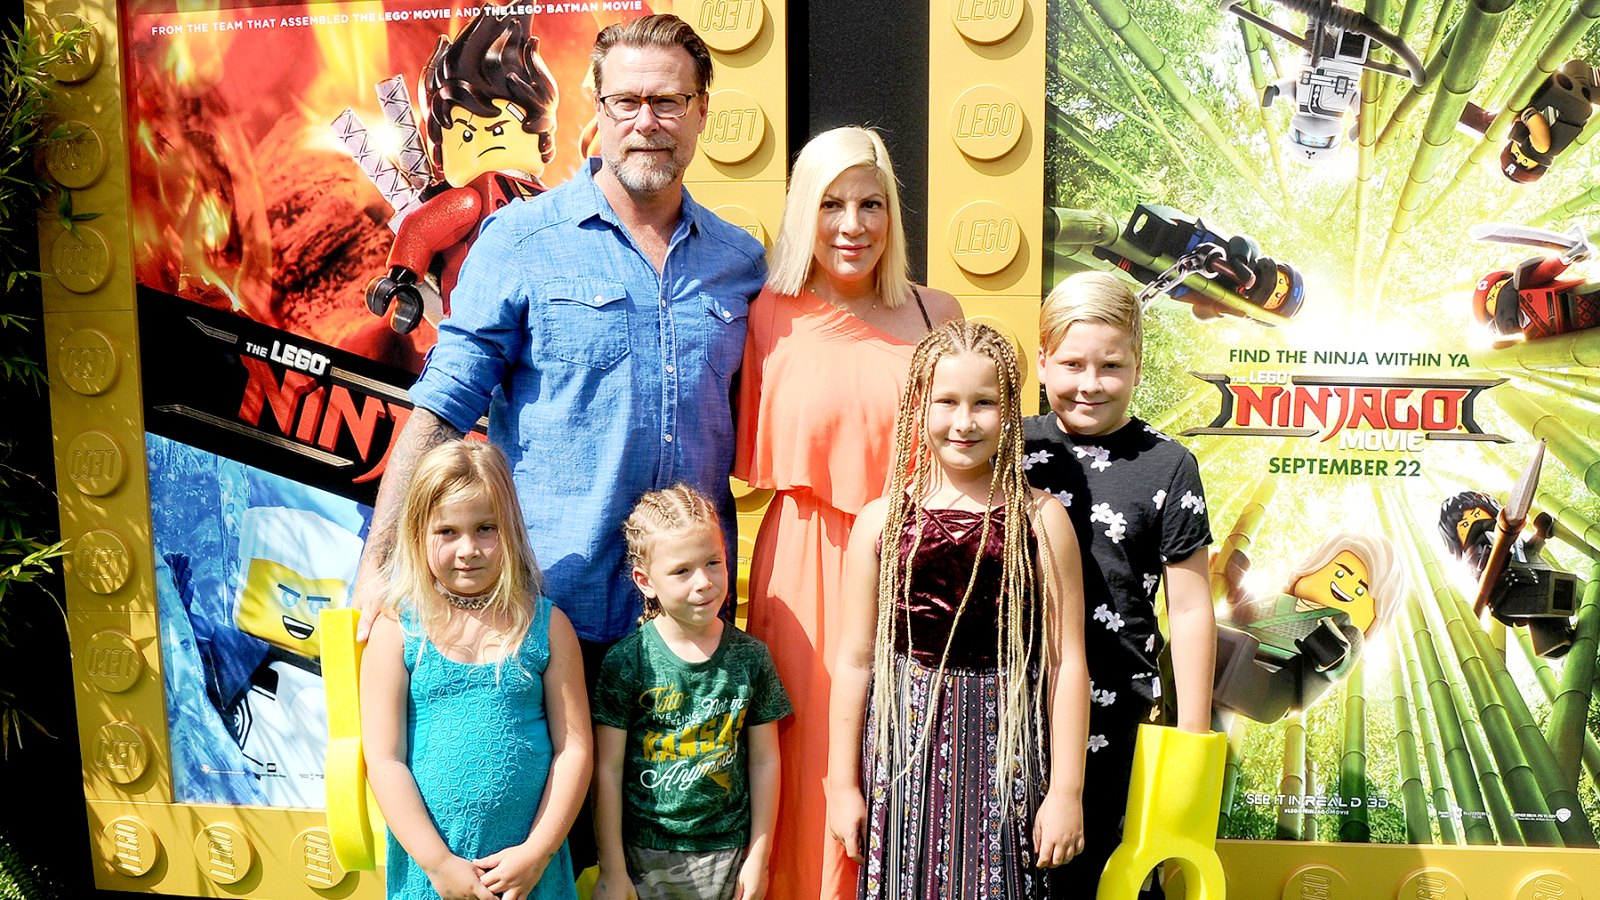 Tori Spelling, Dean McDermott and children arrive at the premiere of Warner Bros. Pictures' "The LEGO Ninjago Movie" at Regency Village Theatre on September 16, 2017 in Westwood, California.